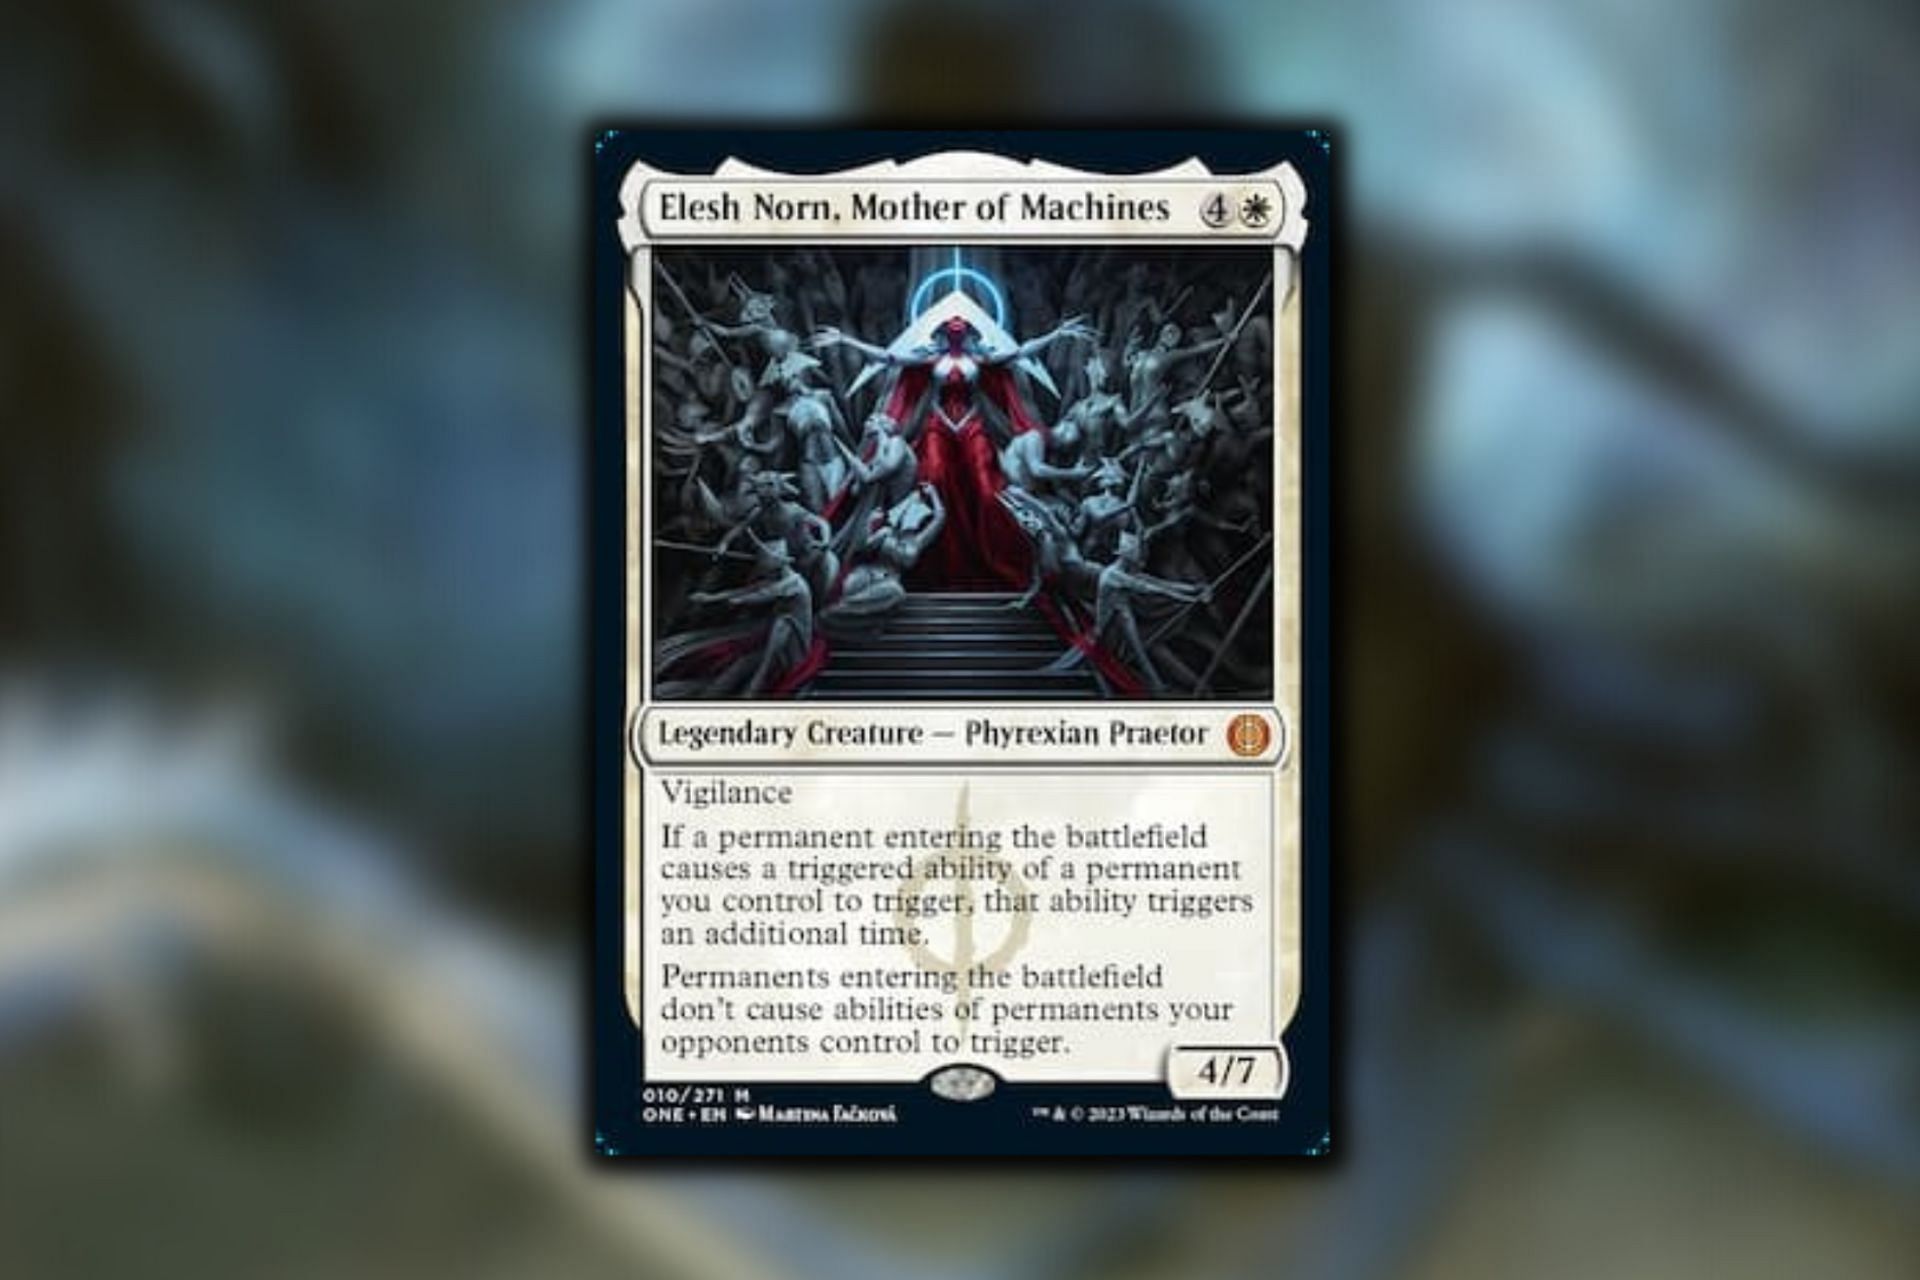 Elesh Norn, Mother of Machines in Magic: The Gathering (Image via Wizards of the Coast)